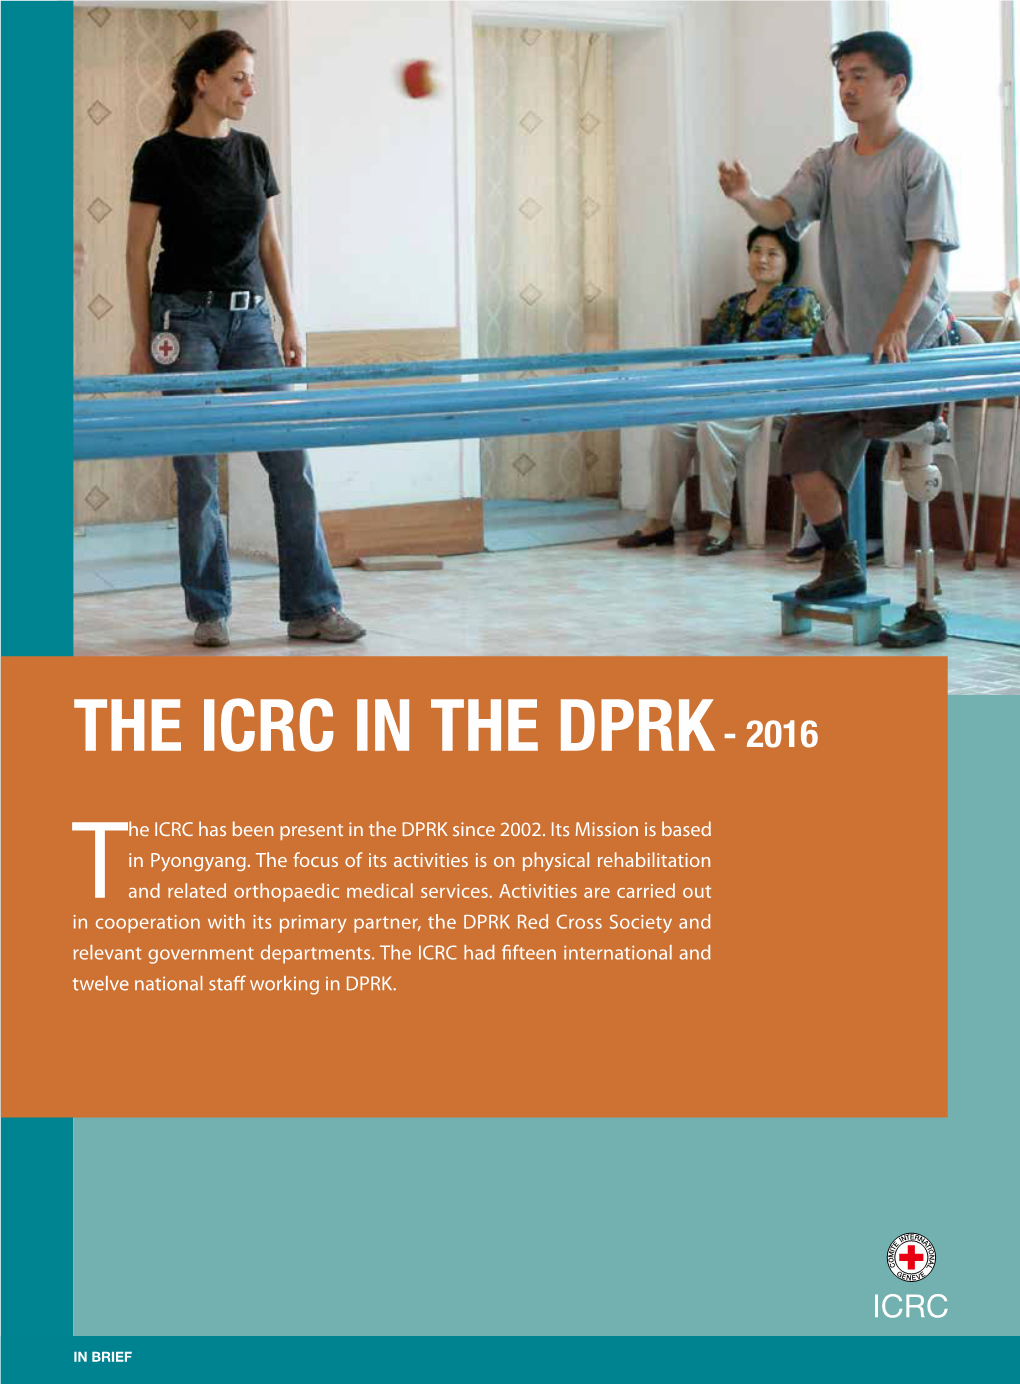 The Icrc in the Dprk- 2016